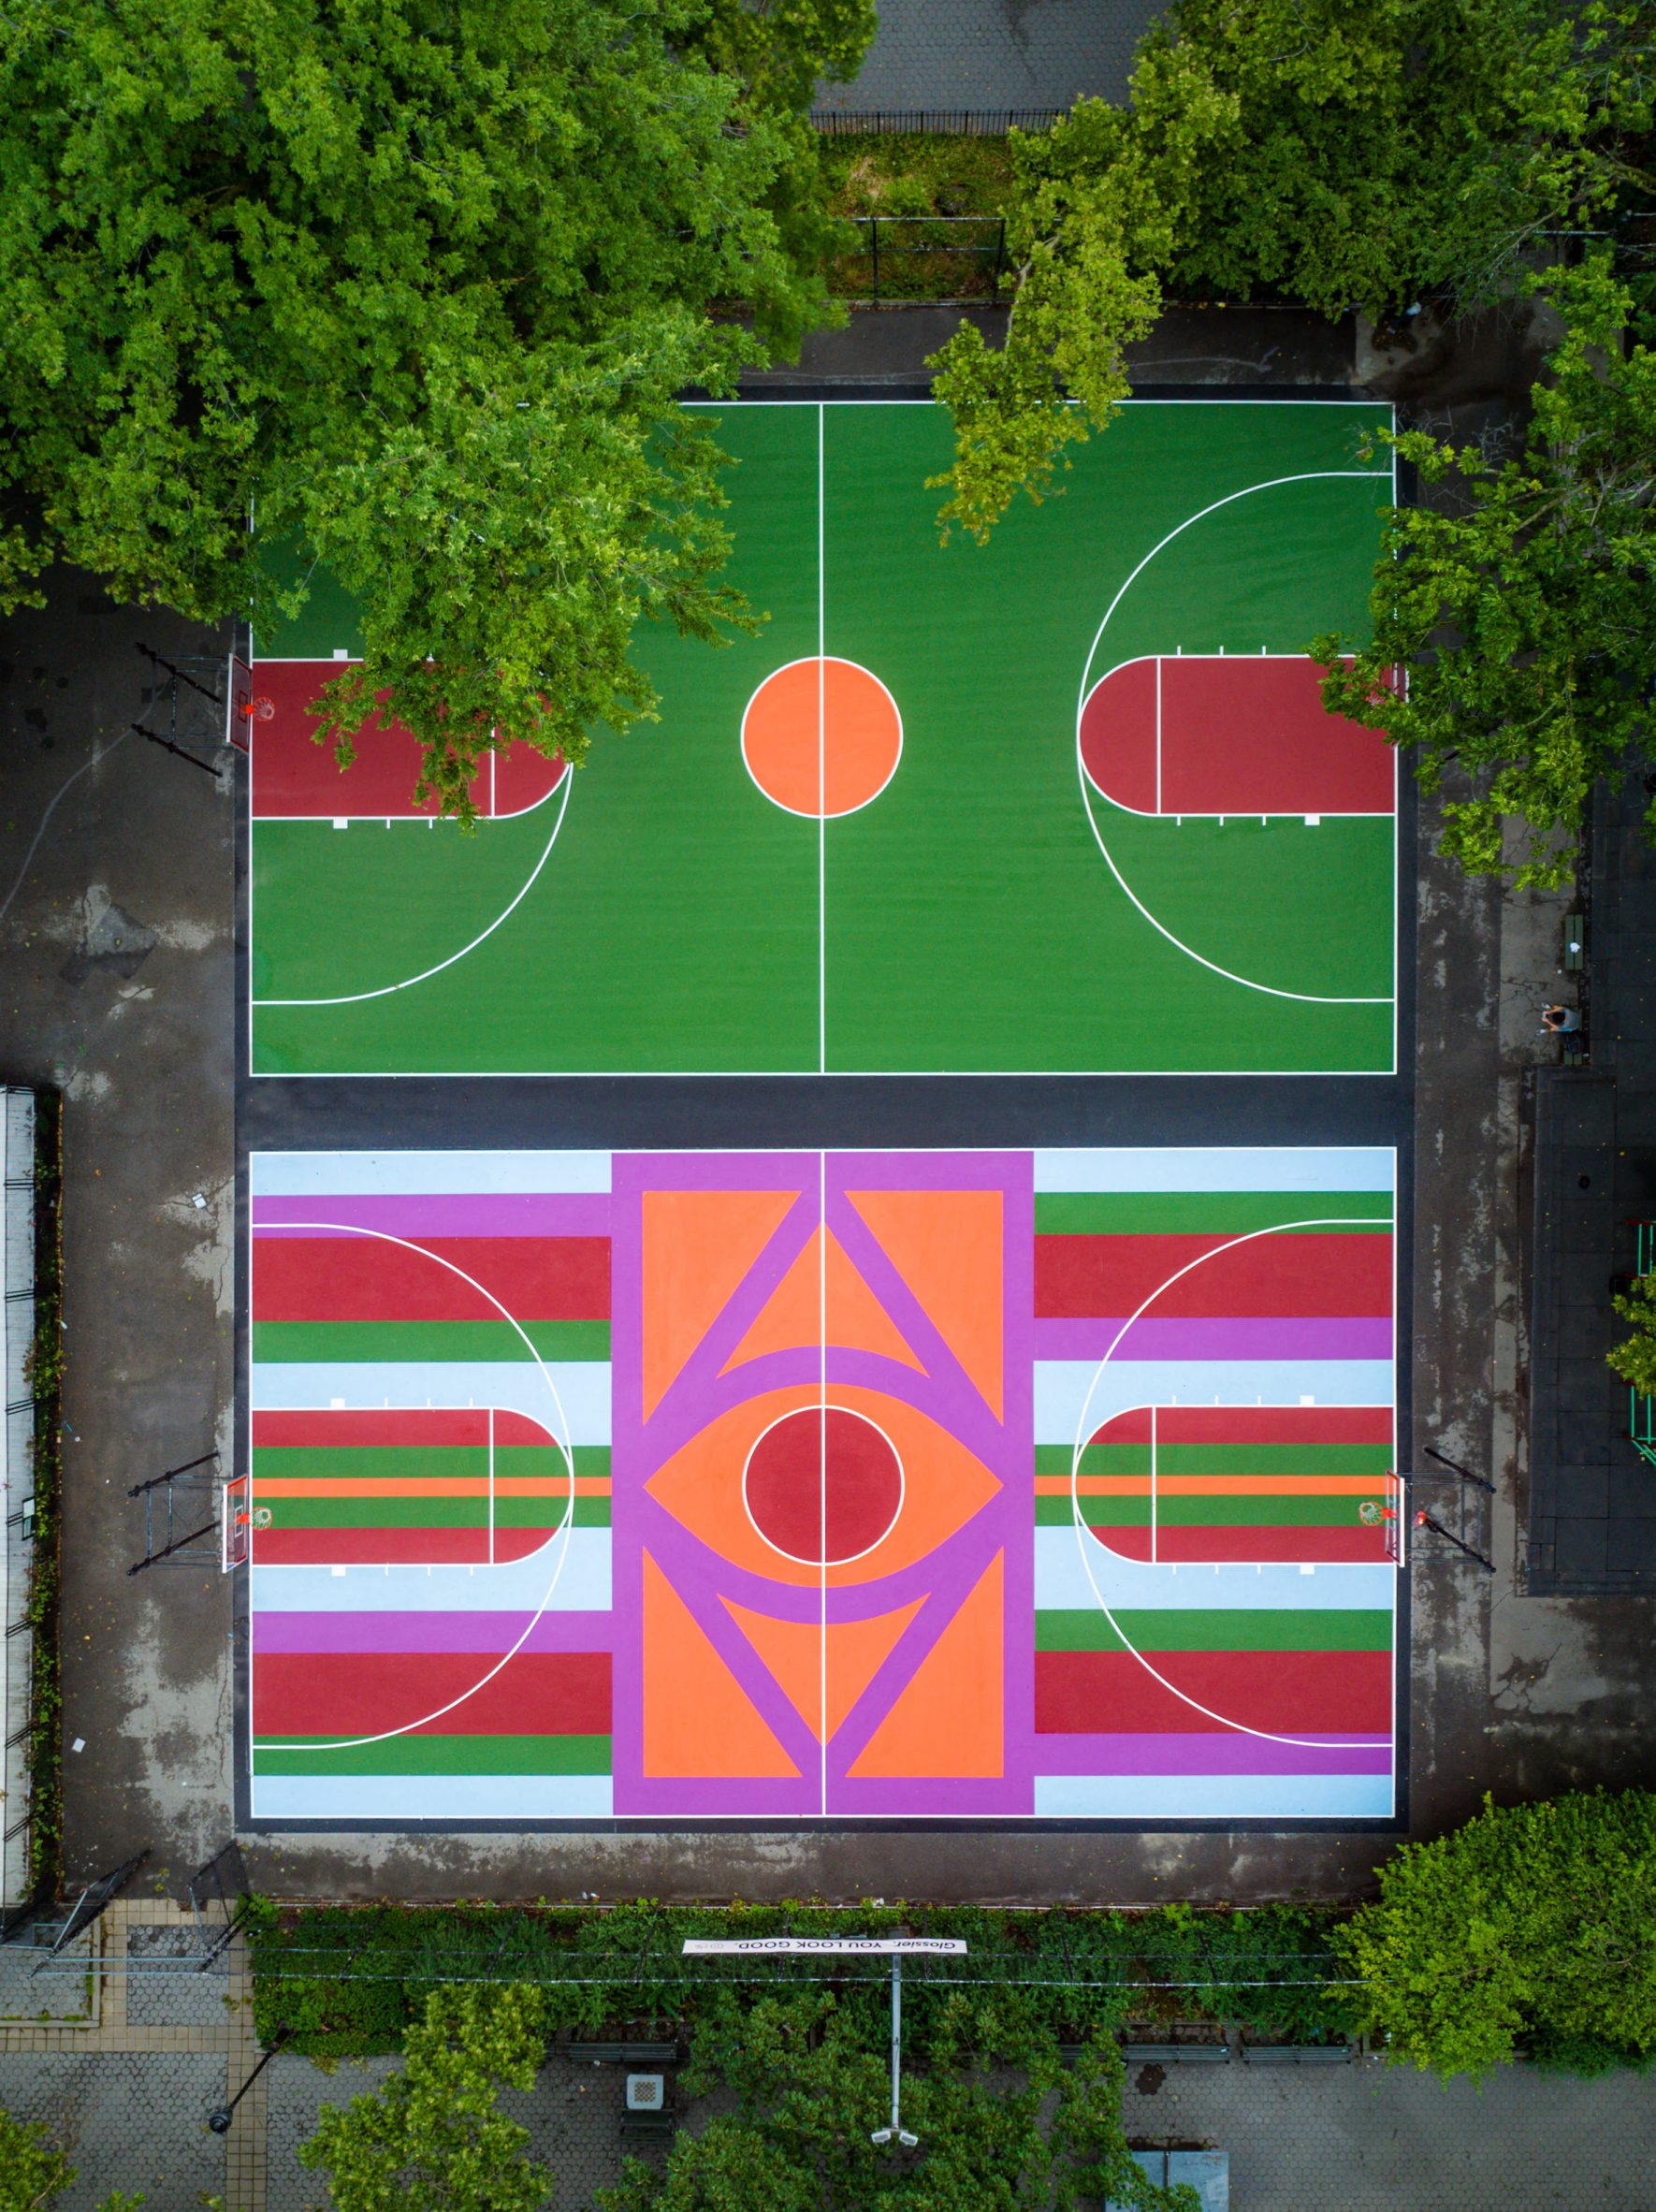 Birdseye view of two Tompkins Square Park basketball courts by Glossier